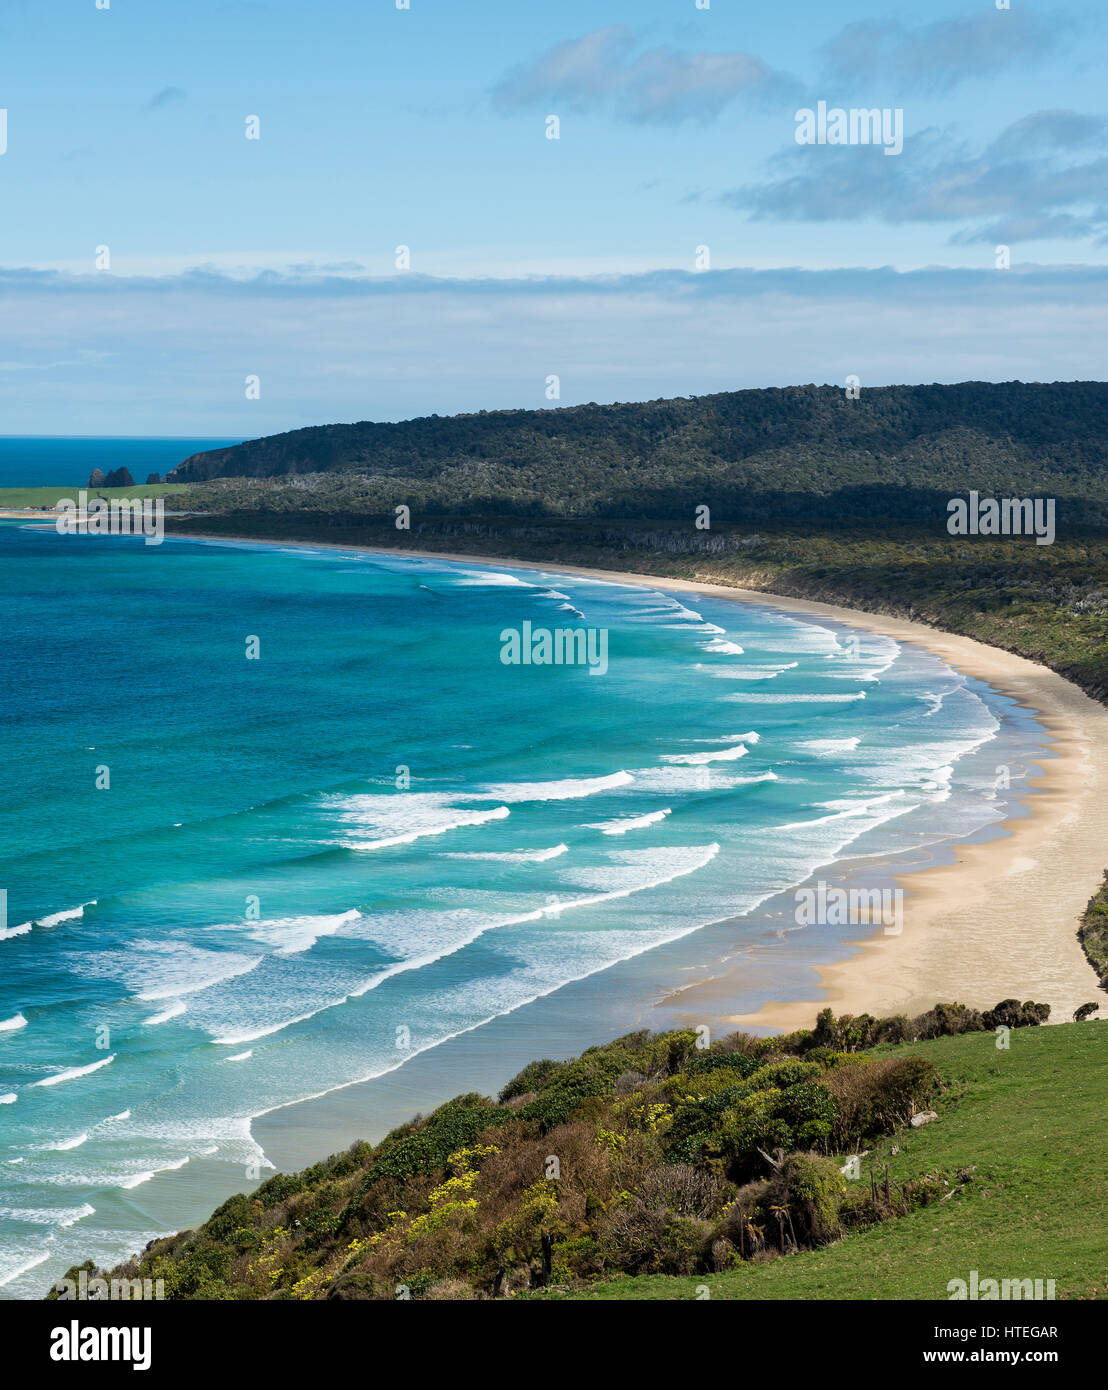 Lookout, Firenze Hill Lookout, spiaggia Tautuku Bay, il Catlins, Regione del Southland, Southland, Nuova Zelanda Foto Stock